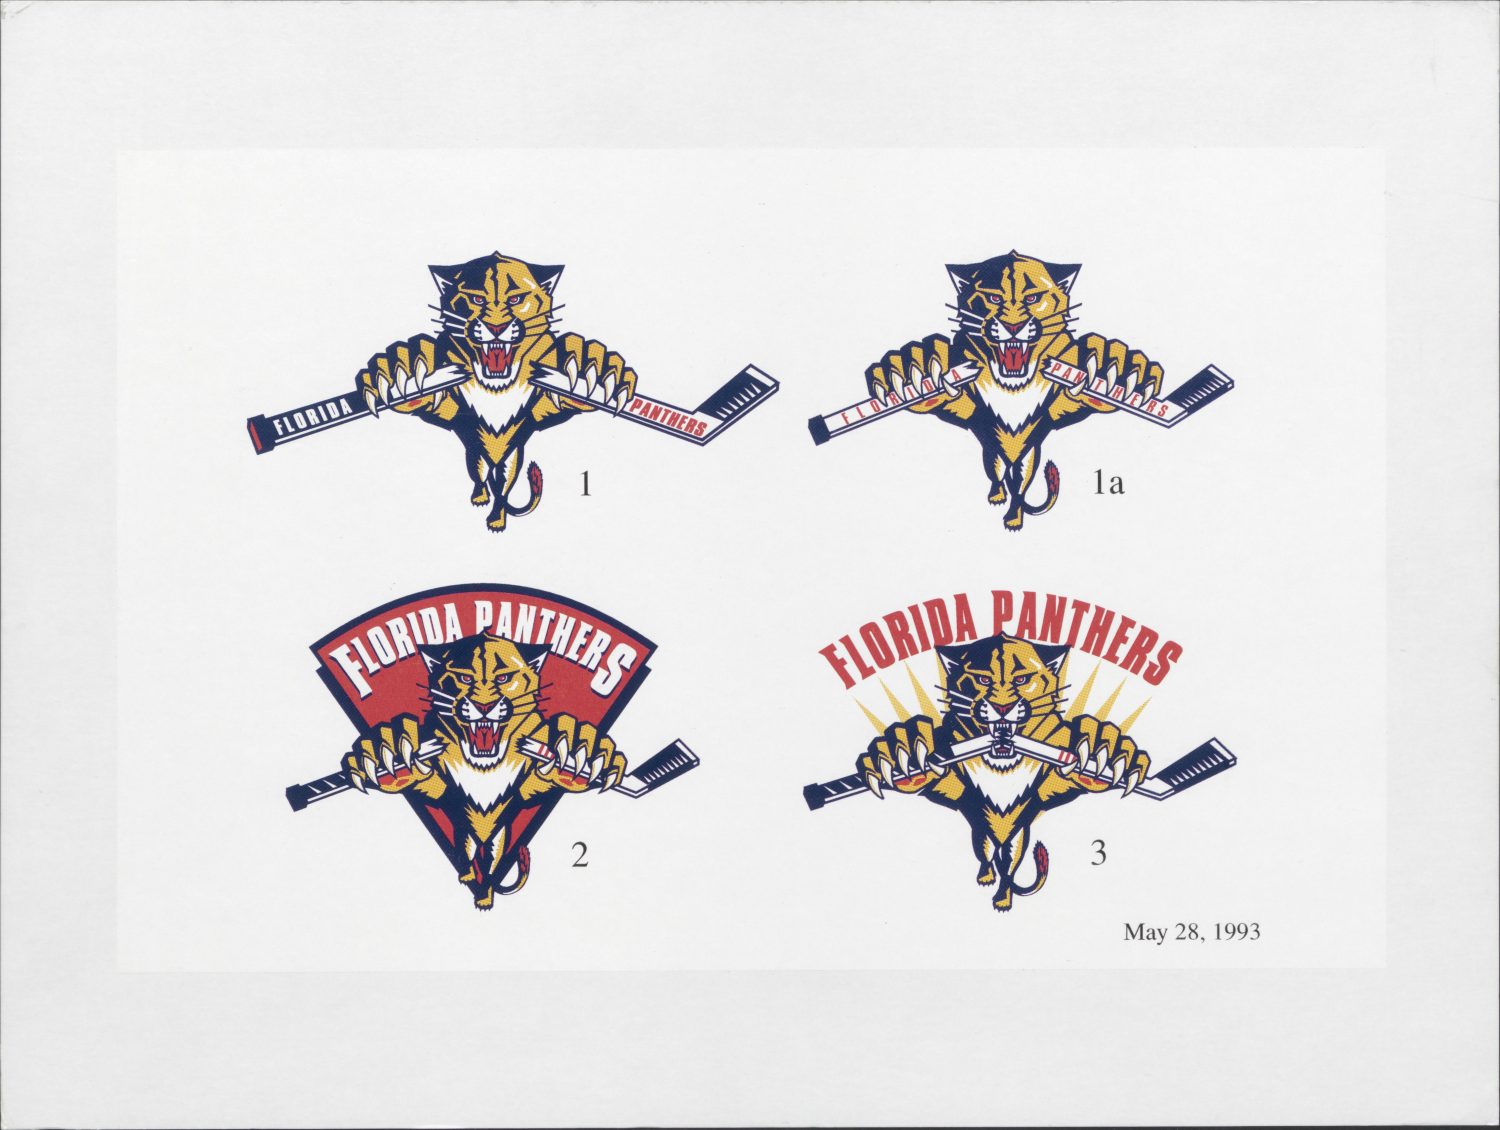 jersey Archives - Page 2 of 4 - Florida Panthers Virtual Vault